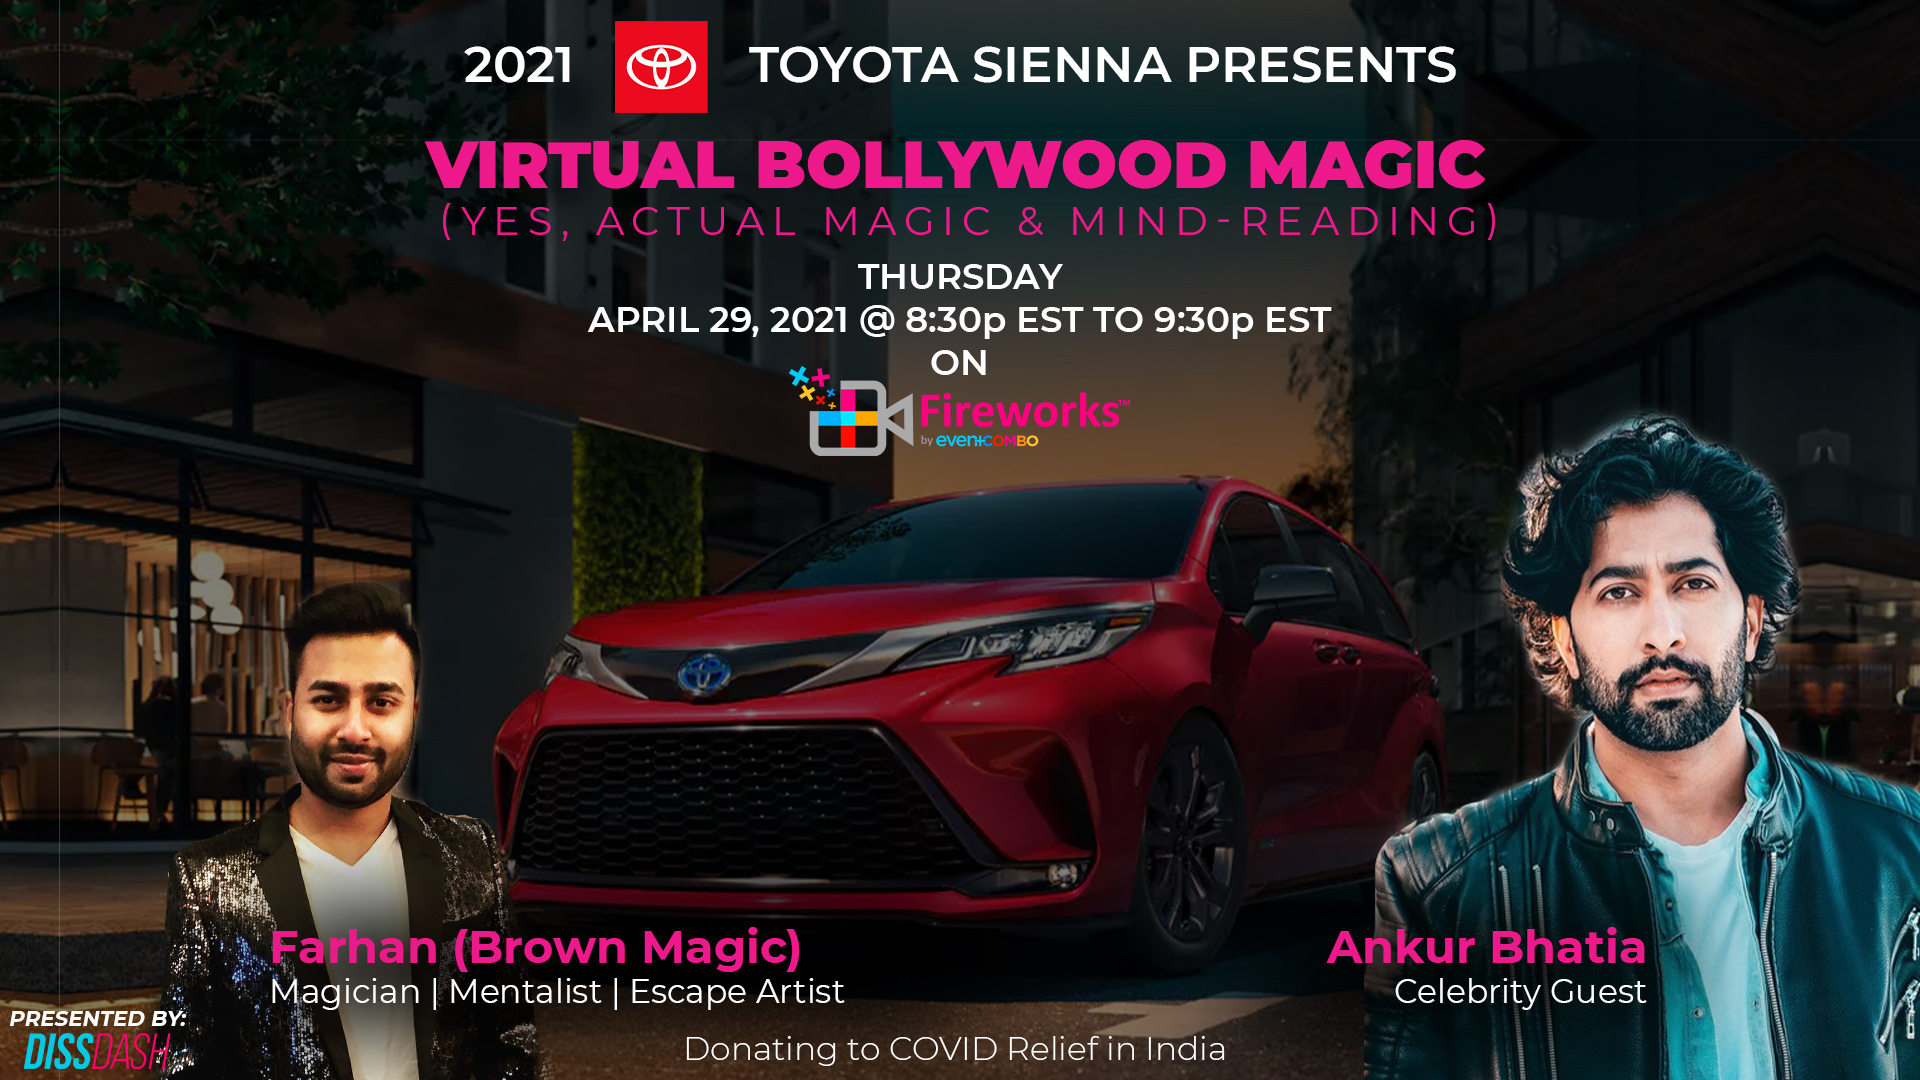 All-New 2021 Toyota Sienna Presents Virtual Bollywood Magic (Yes, ACTUAL Magic & Mind Reading) with Celebrity Guest Ankur Bhatia and Farhan's Brown Magic